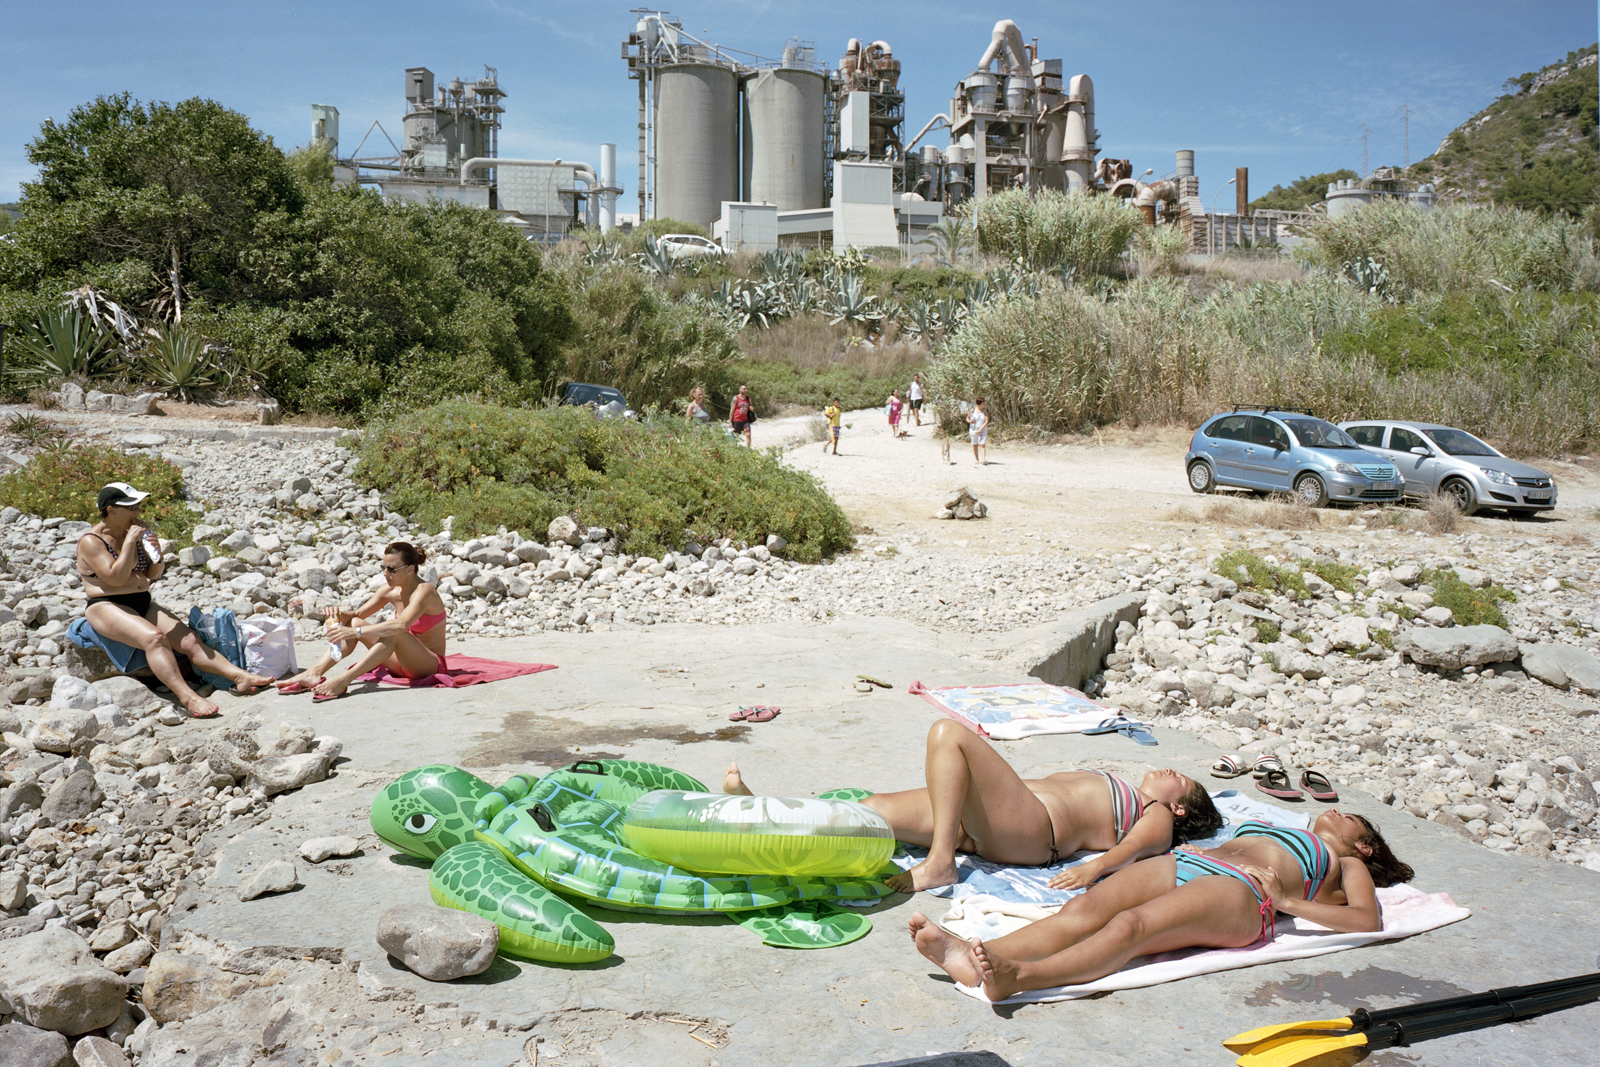 Throughout the series, which has just been published as a book by Mack, sun-seekers set up camp in car parks; swimming pools appear as mini oases in a desert of grey concrete; and cranes and cooling towers loom awkwardly over beaches. The contrast between these built up, man-made environments and the sunbathers, who appear minute in scale, is amusingly surreal, but highlights our subservience towards industry, housing developments and superstores.